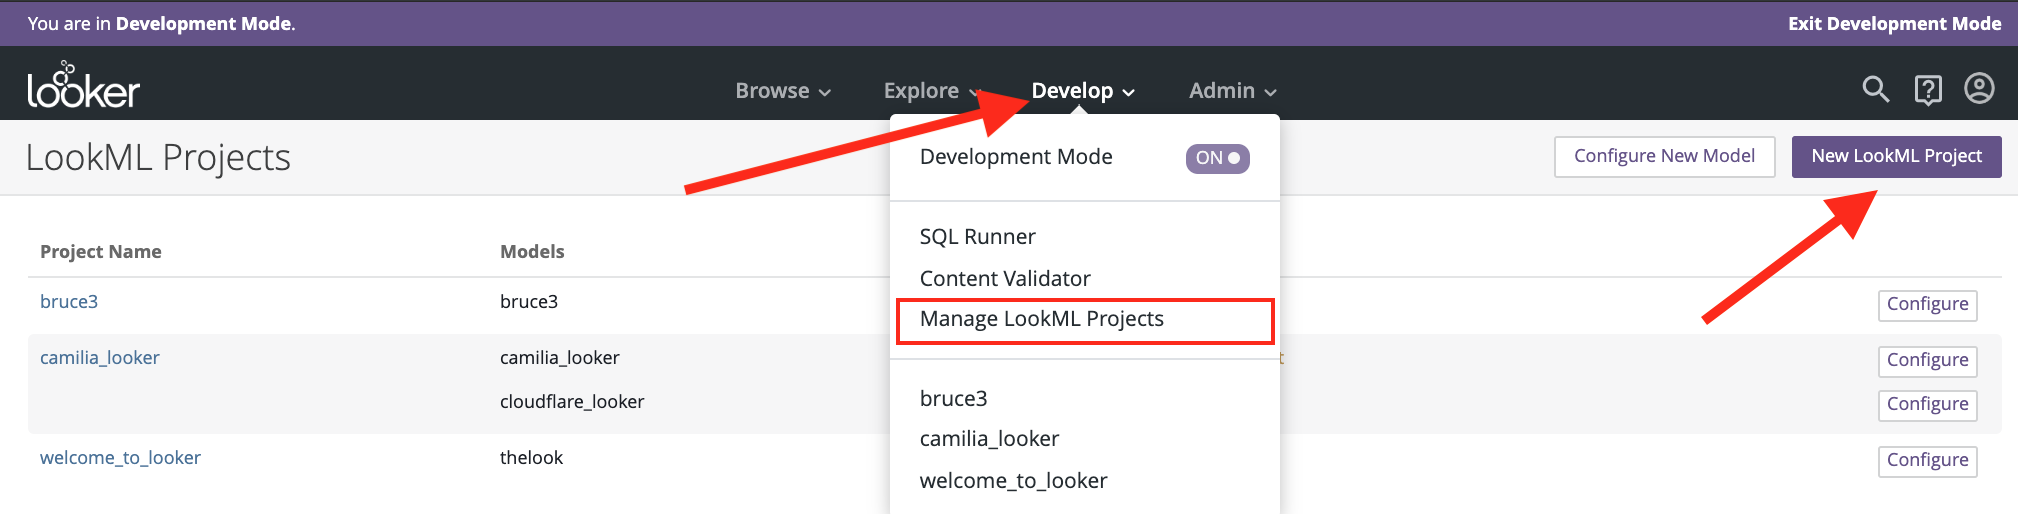 LookML projects page highlighting Develop menu and Manage LookML Projects and New LookML Project options